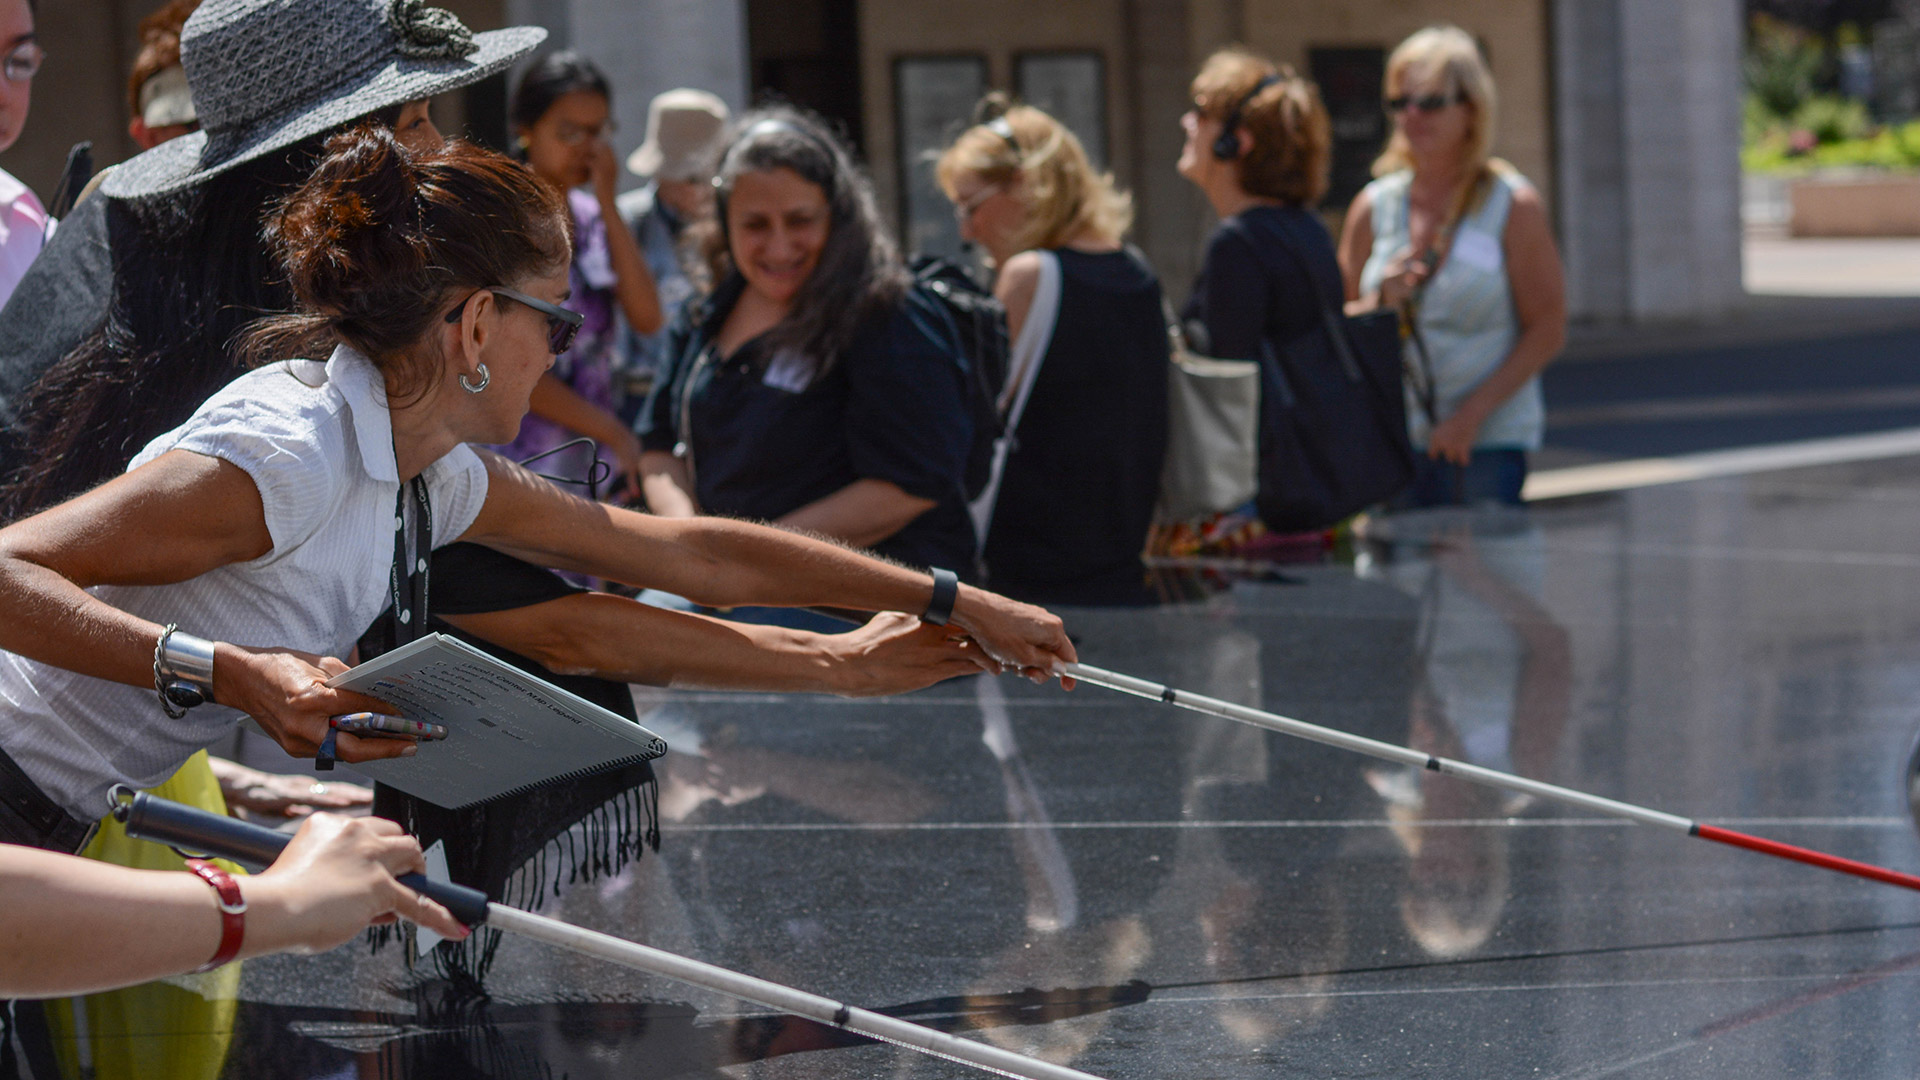 A group on a touch tour of Lincoln Center. A woman reaches out over the black granite rim of the Revson Fountain using a cane. Others on the tour watch and smile.